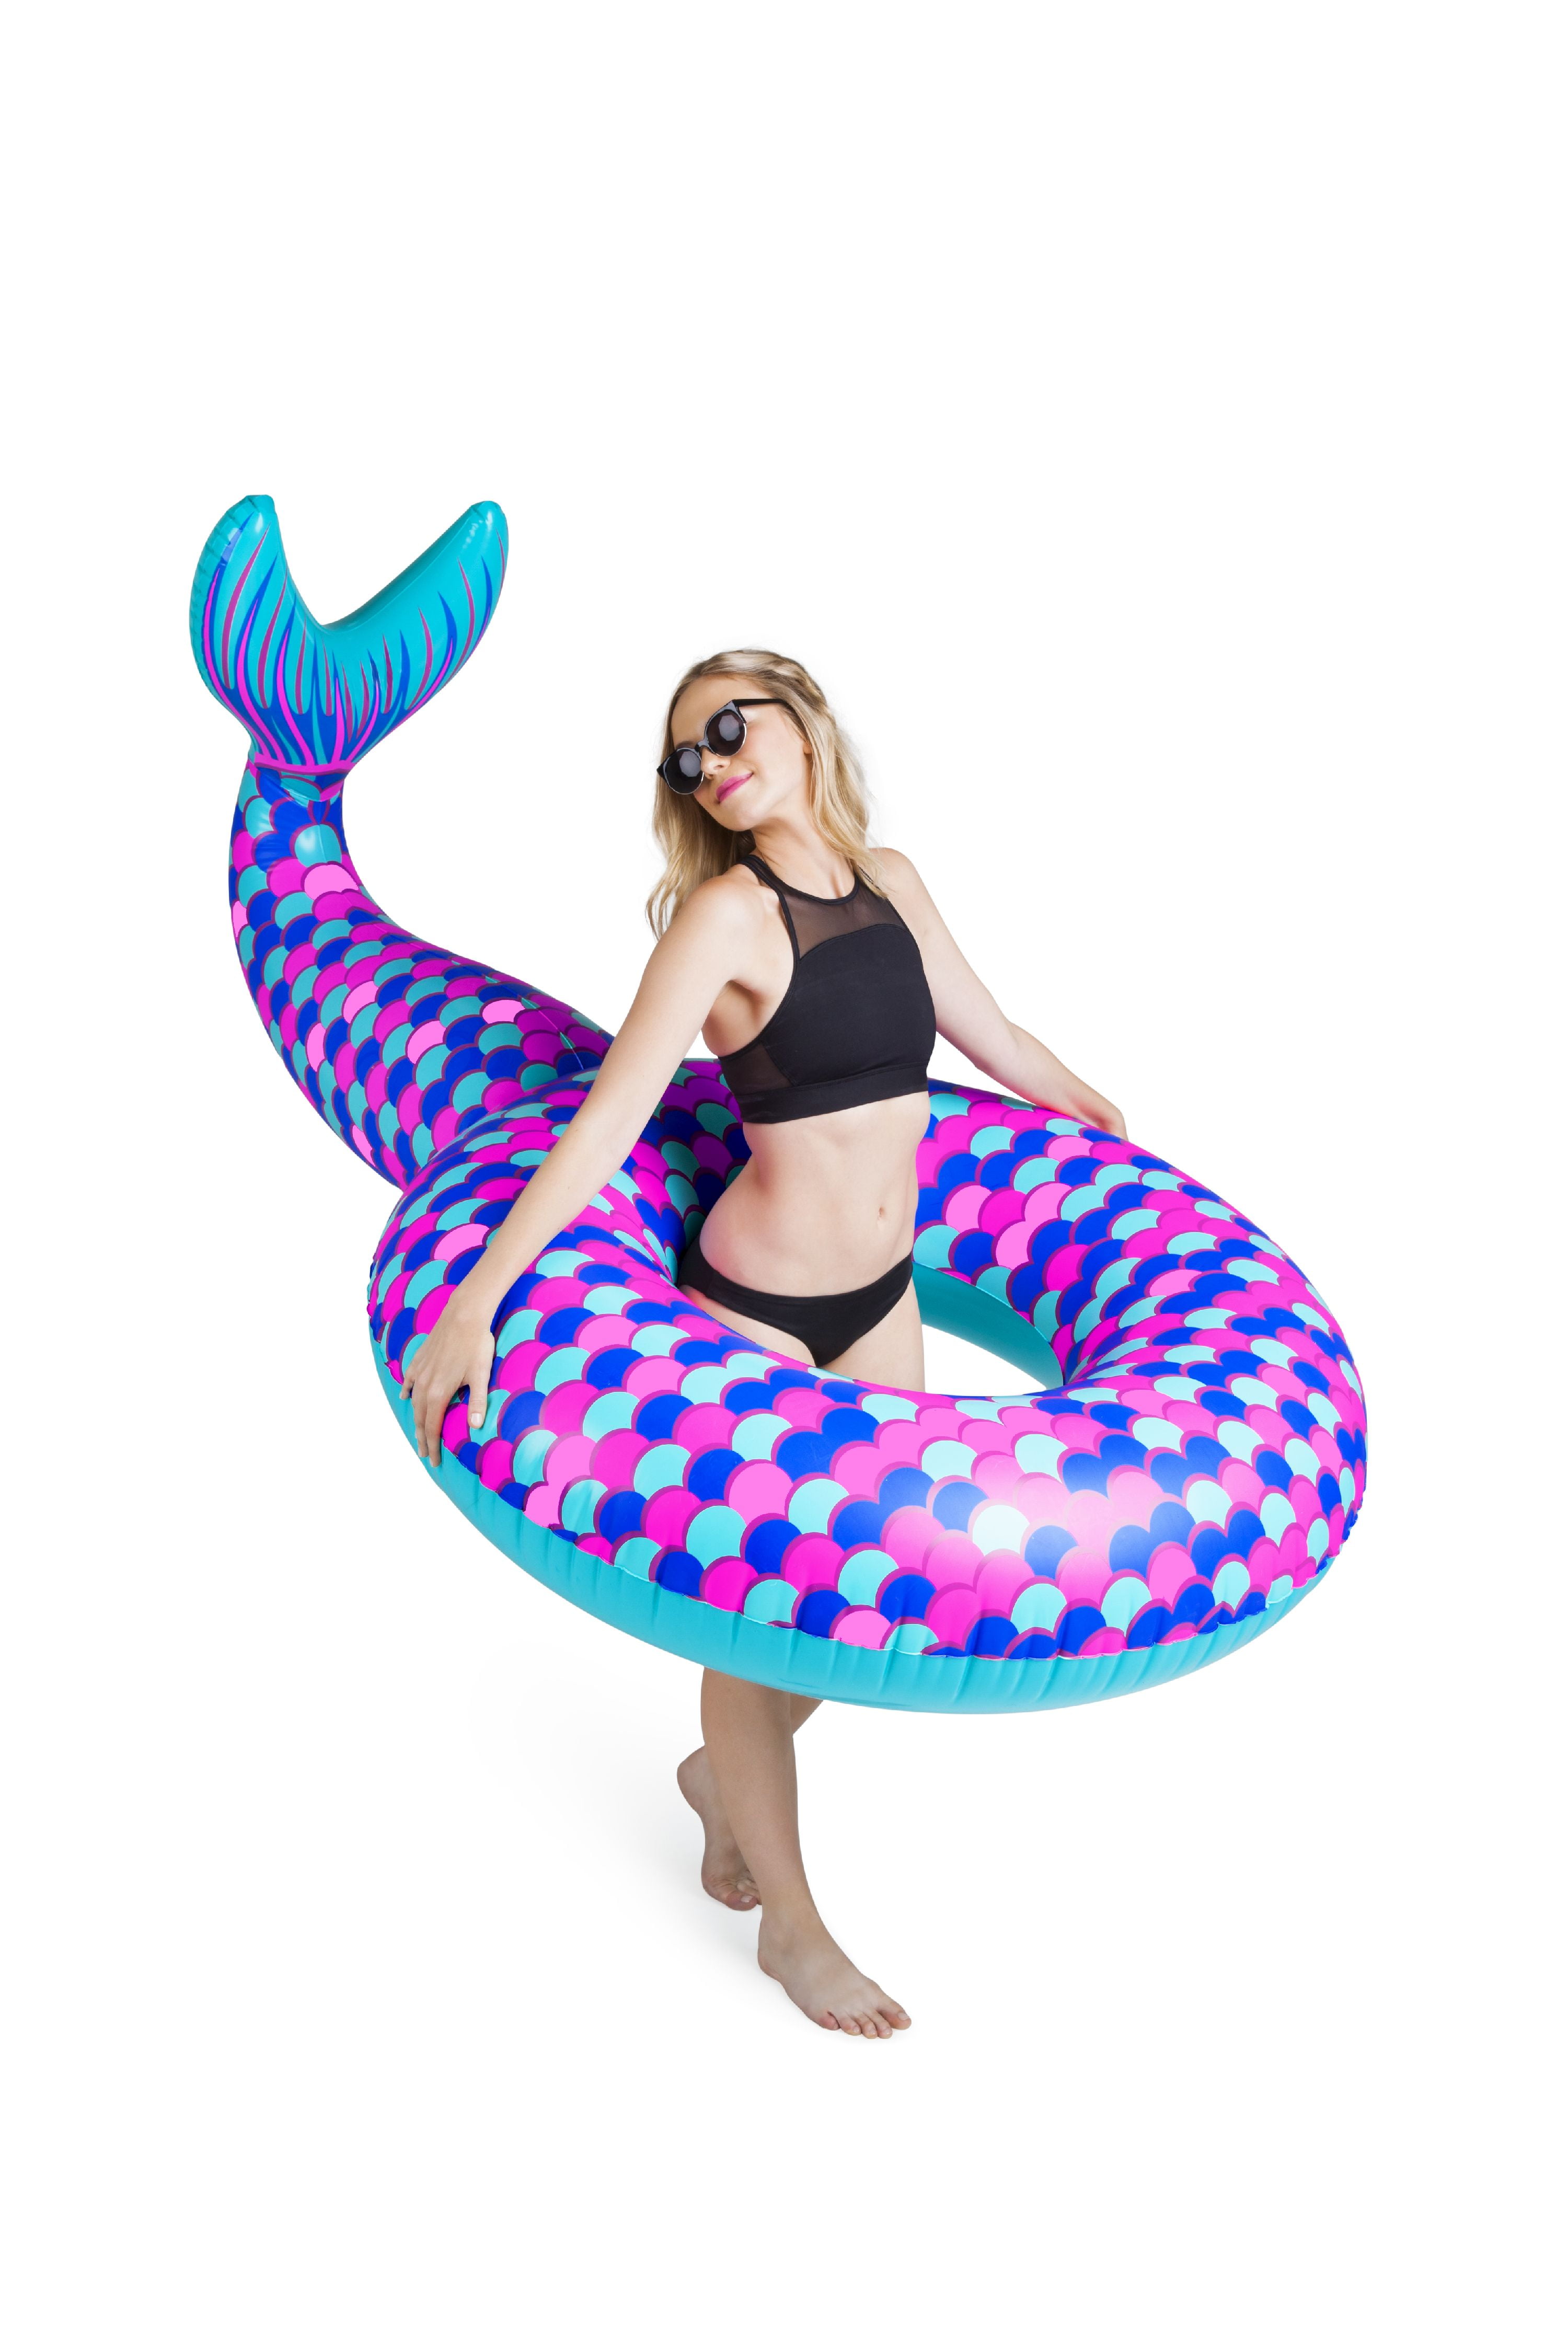 BigMouth Inc Gigantic Donut Pool Float Funny Inflatable Vinyl Summer Pool or Beach Toy Patch Kit Included 